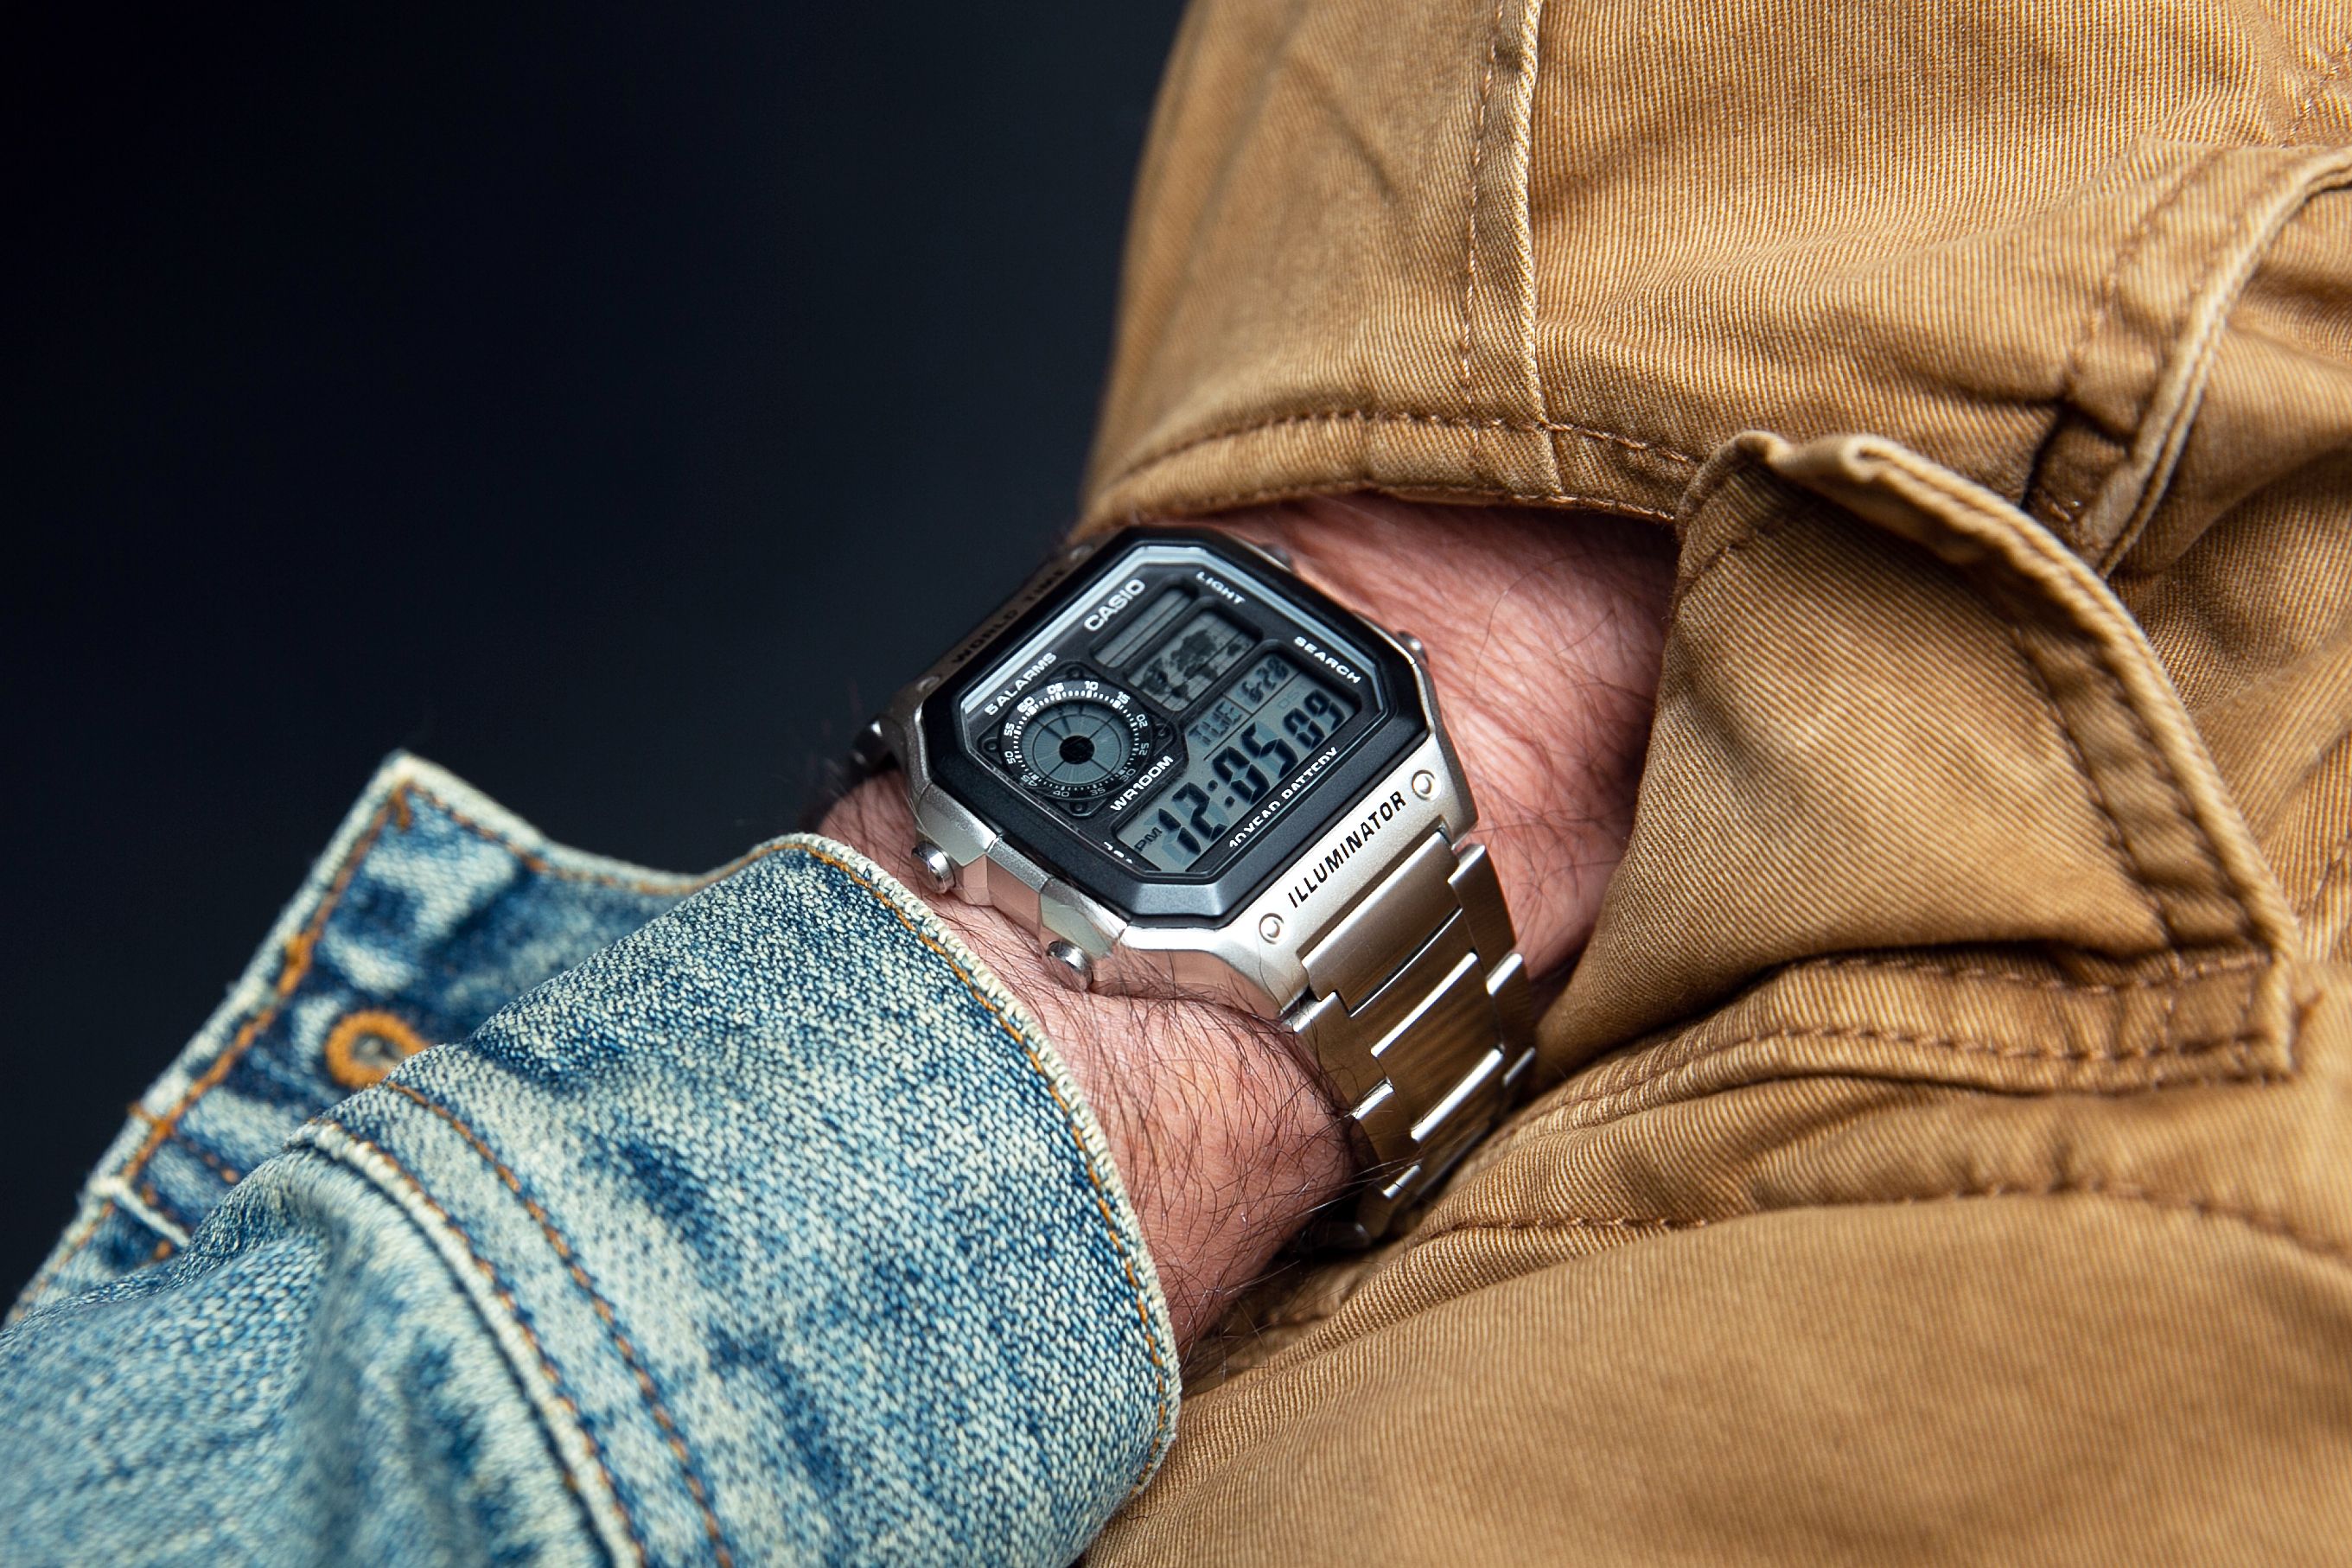 Casio World Time Review: The Best Affordable Digital Watch